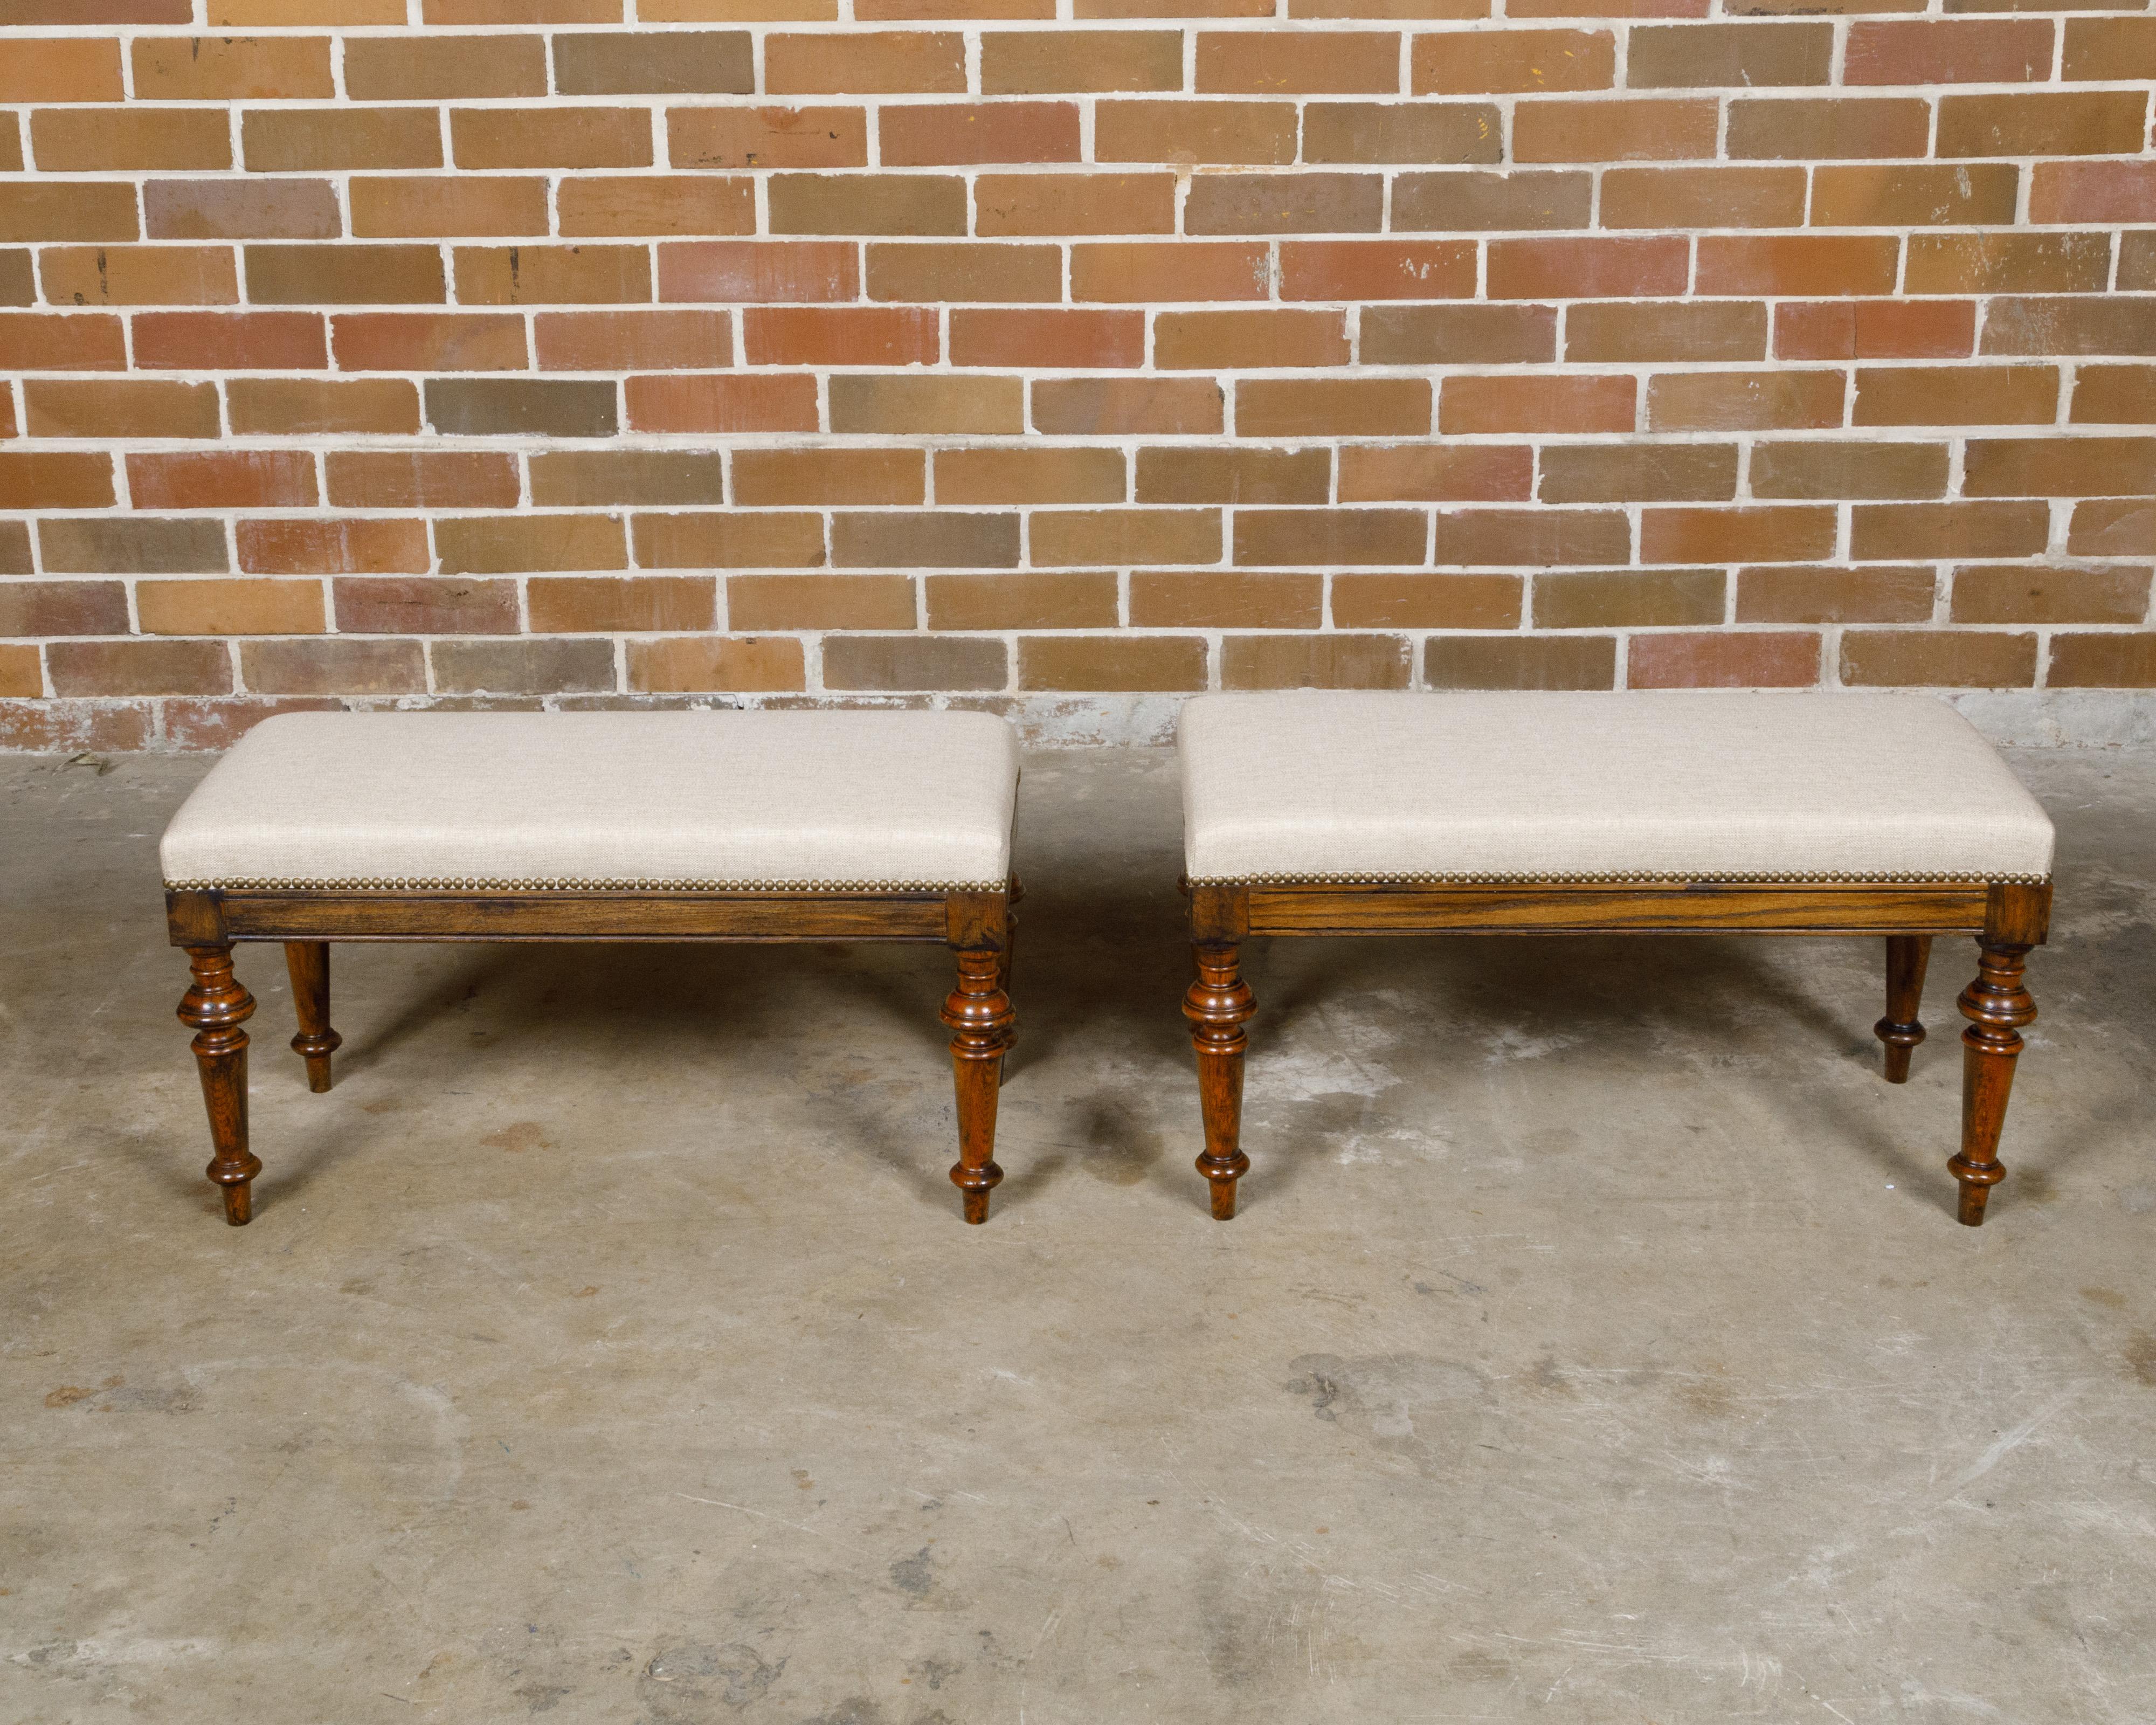 A pair of English oak rectangular stools from the 19th century with turned legs raised on arrow feet and custom upholstery. This captivating pair of English oak stools from the 19th century effortlessly marries the rustic charm of oak with the